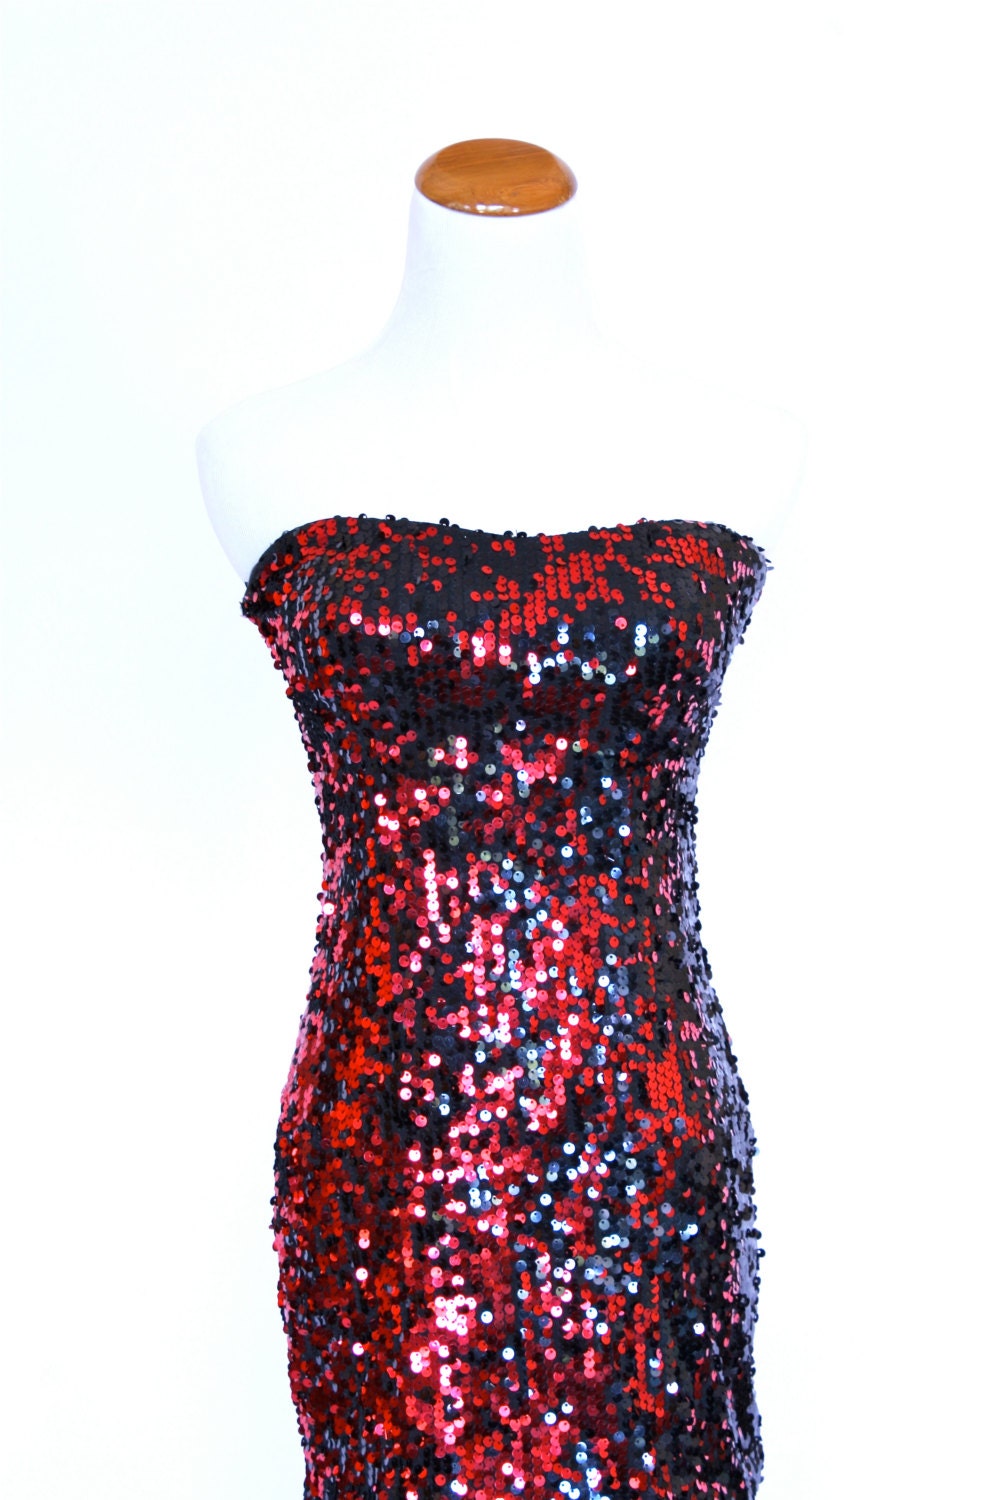 20% OFF SALE 90's Vintage Sequined Dress Red and Black - Etsy